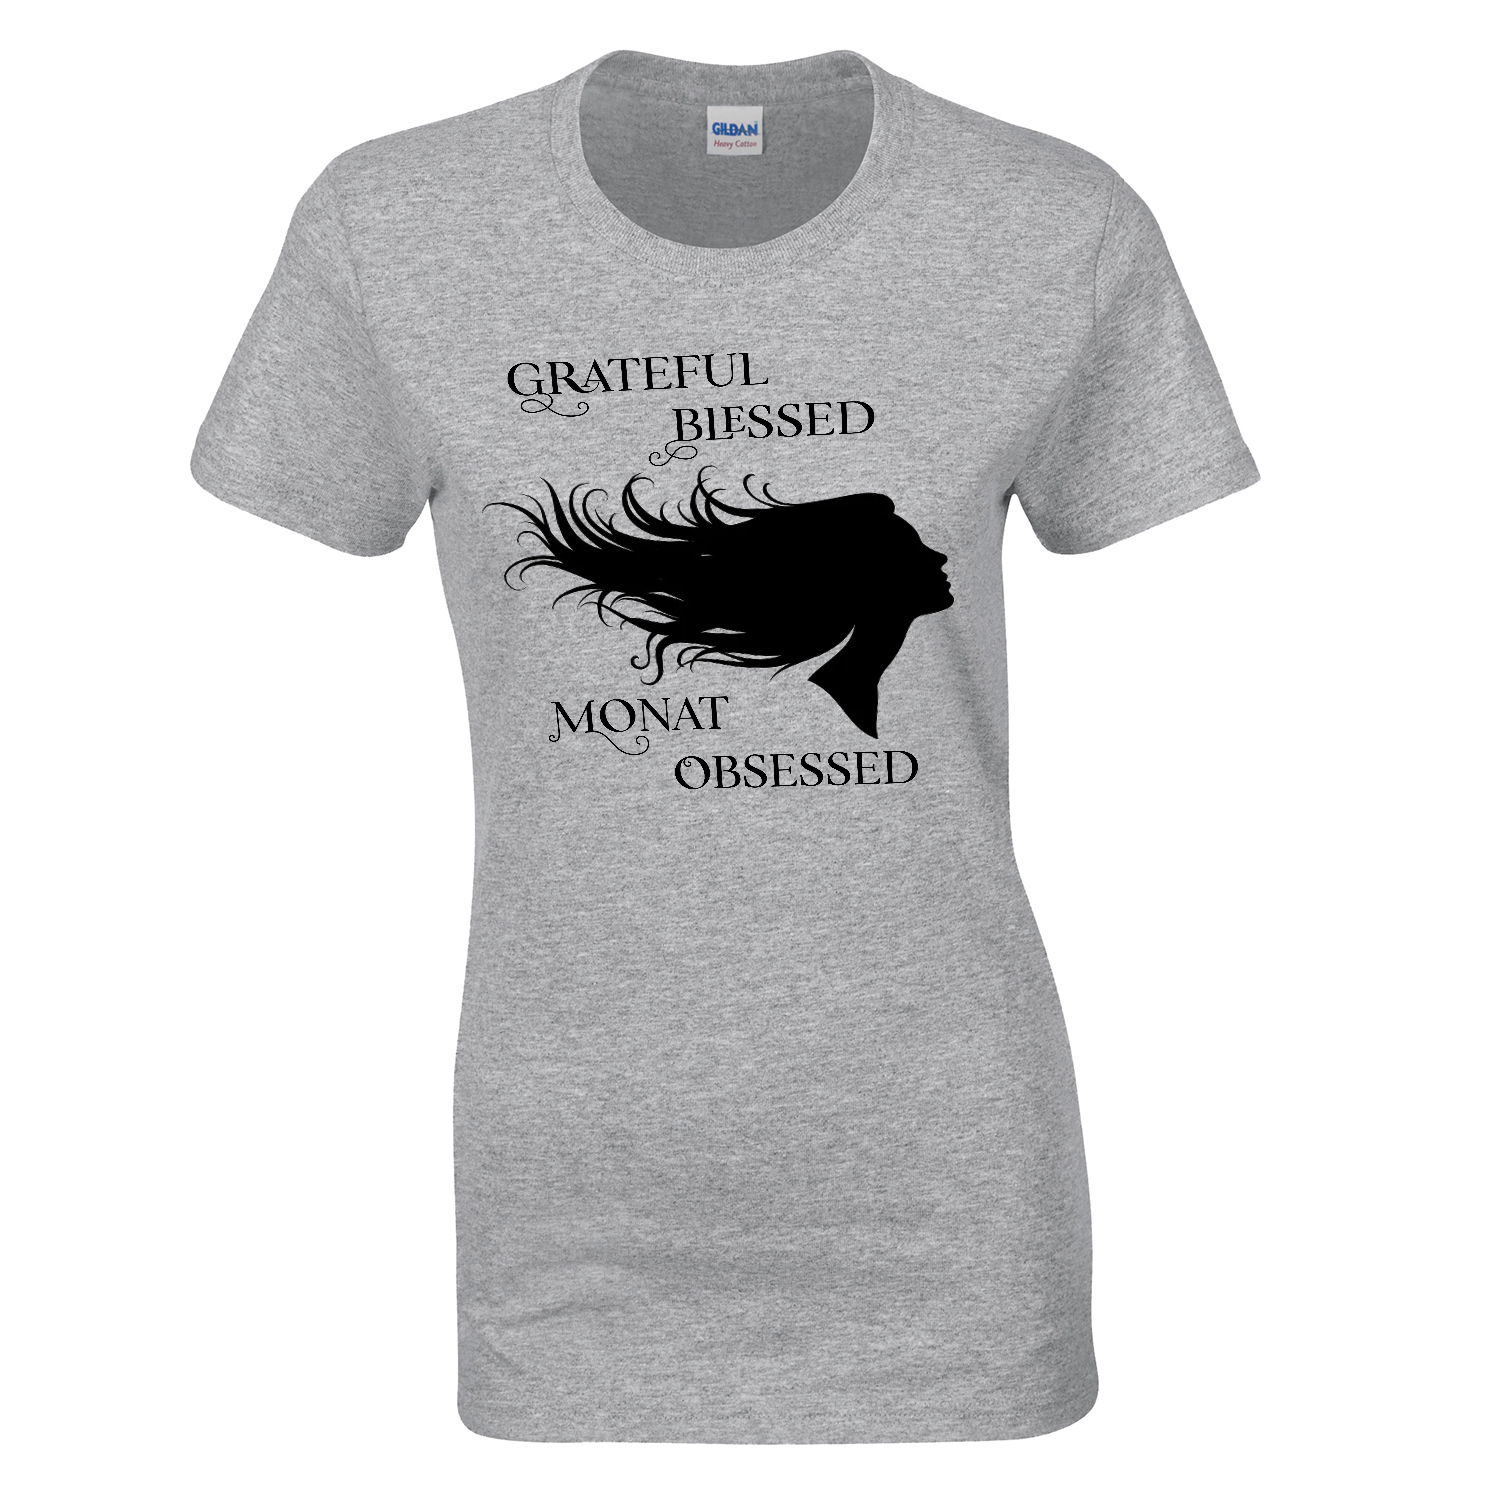 Grateful Blessed Monat Obsessed T-Shirt sports gray